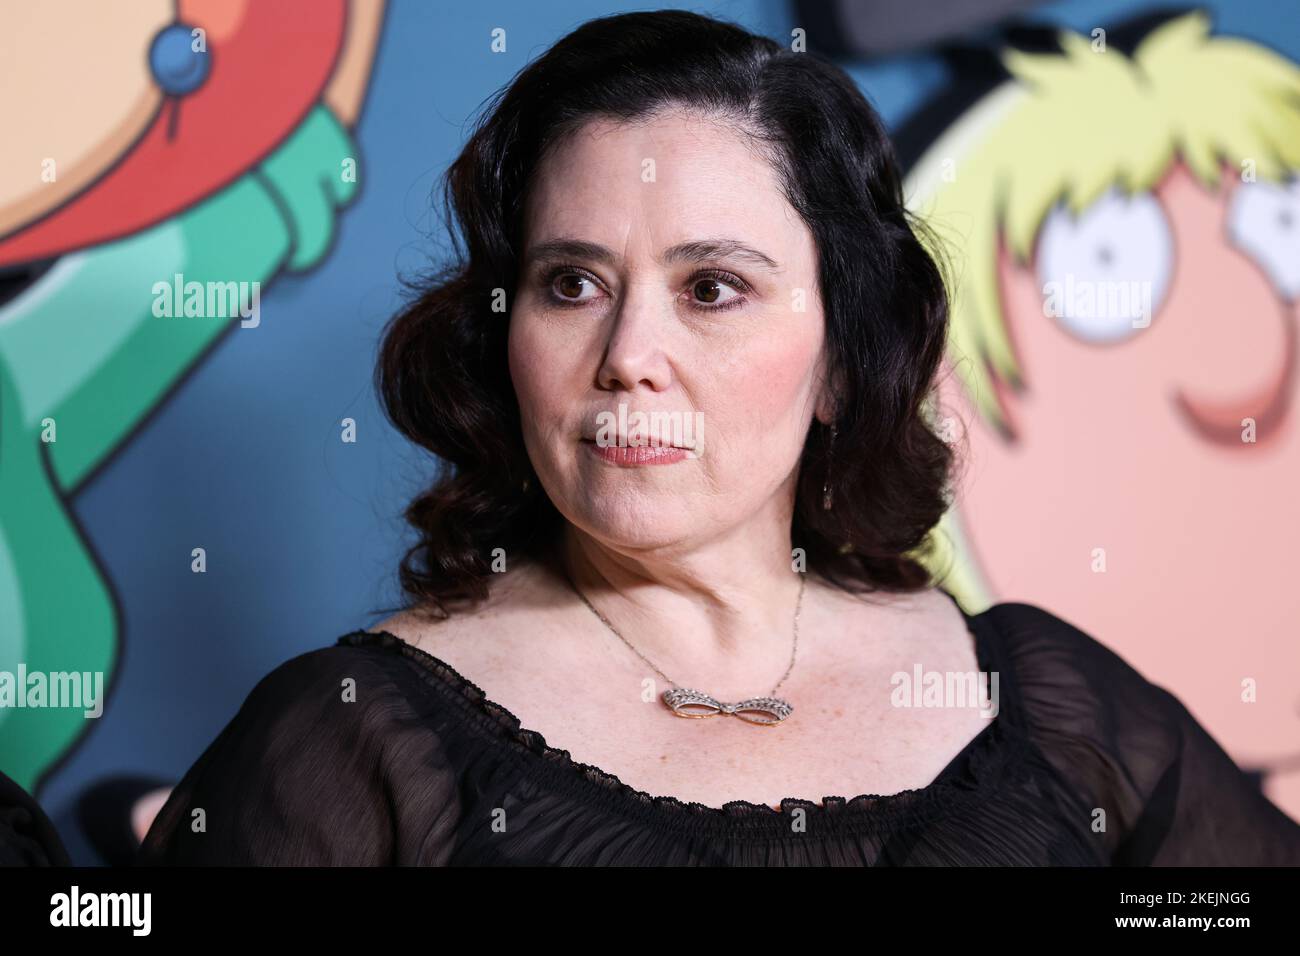 Los Angeles, United States. 12th Nov, 2022. LOS ANGELES, CALIFORNIA, USA - NOVEMBER 12: American actress, comedian, writer and producer Alex Borstein arrives at FOX's 'Family Guy' 400th Episode Celebration held at the Fox Studio Lot on November 12, 2022 in Los Angeles, California, United States. (Photo by Xavier Collin/Image Press Agency) Credit: Image Press Agency/Alamy Live News Stock Photo